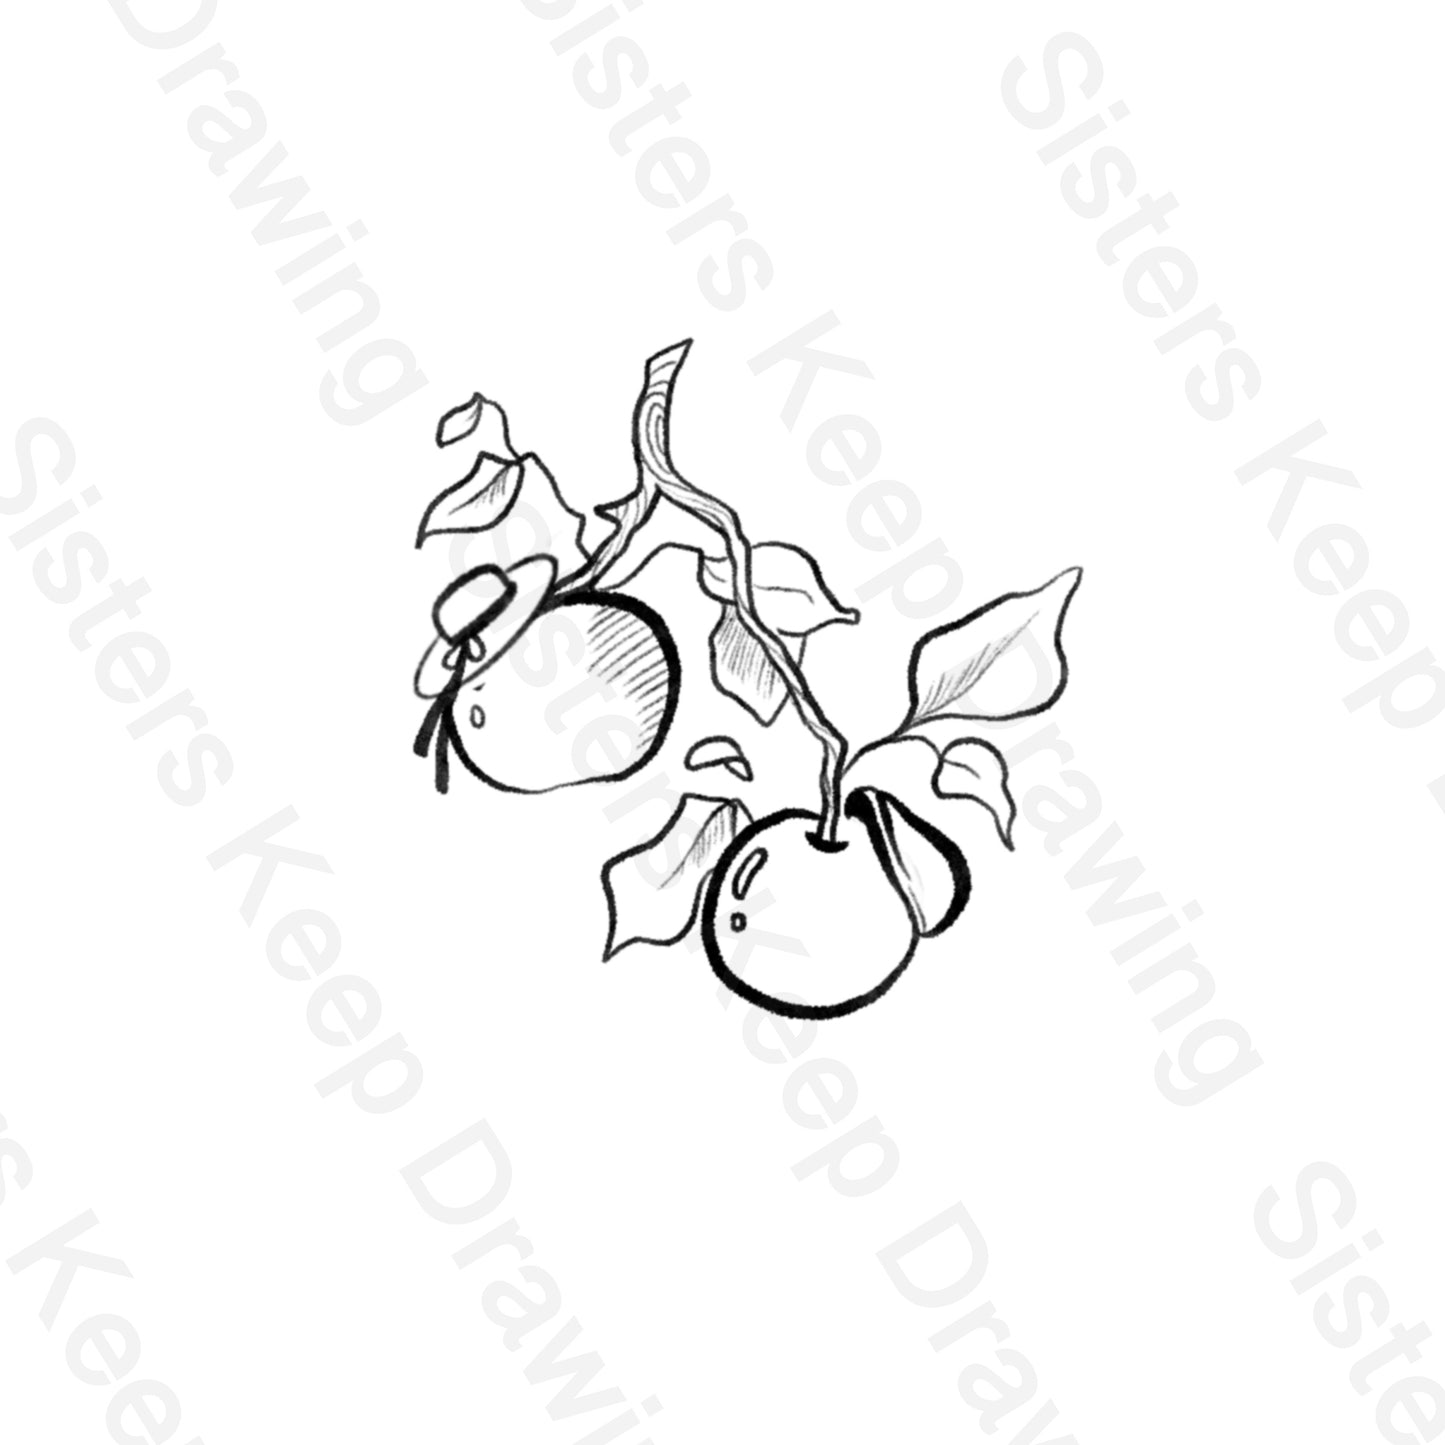 Apples with hats Anne of Green Gables - Tattoo Transparent